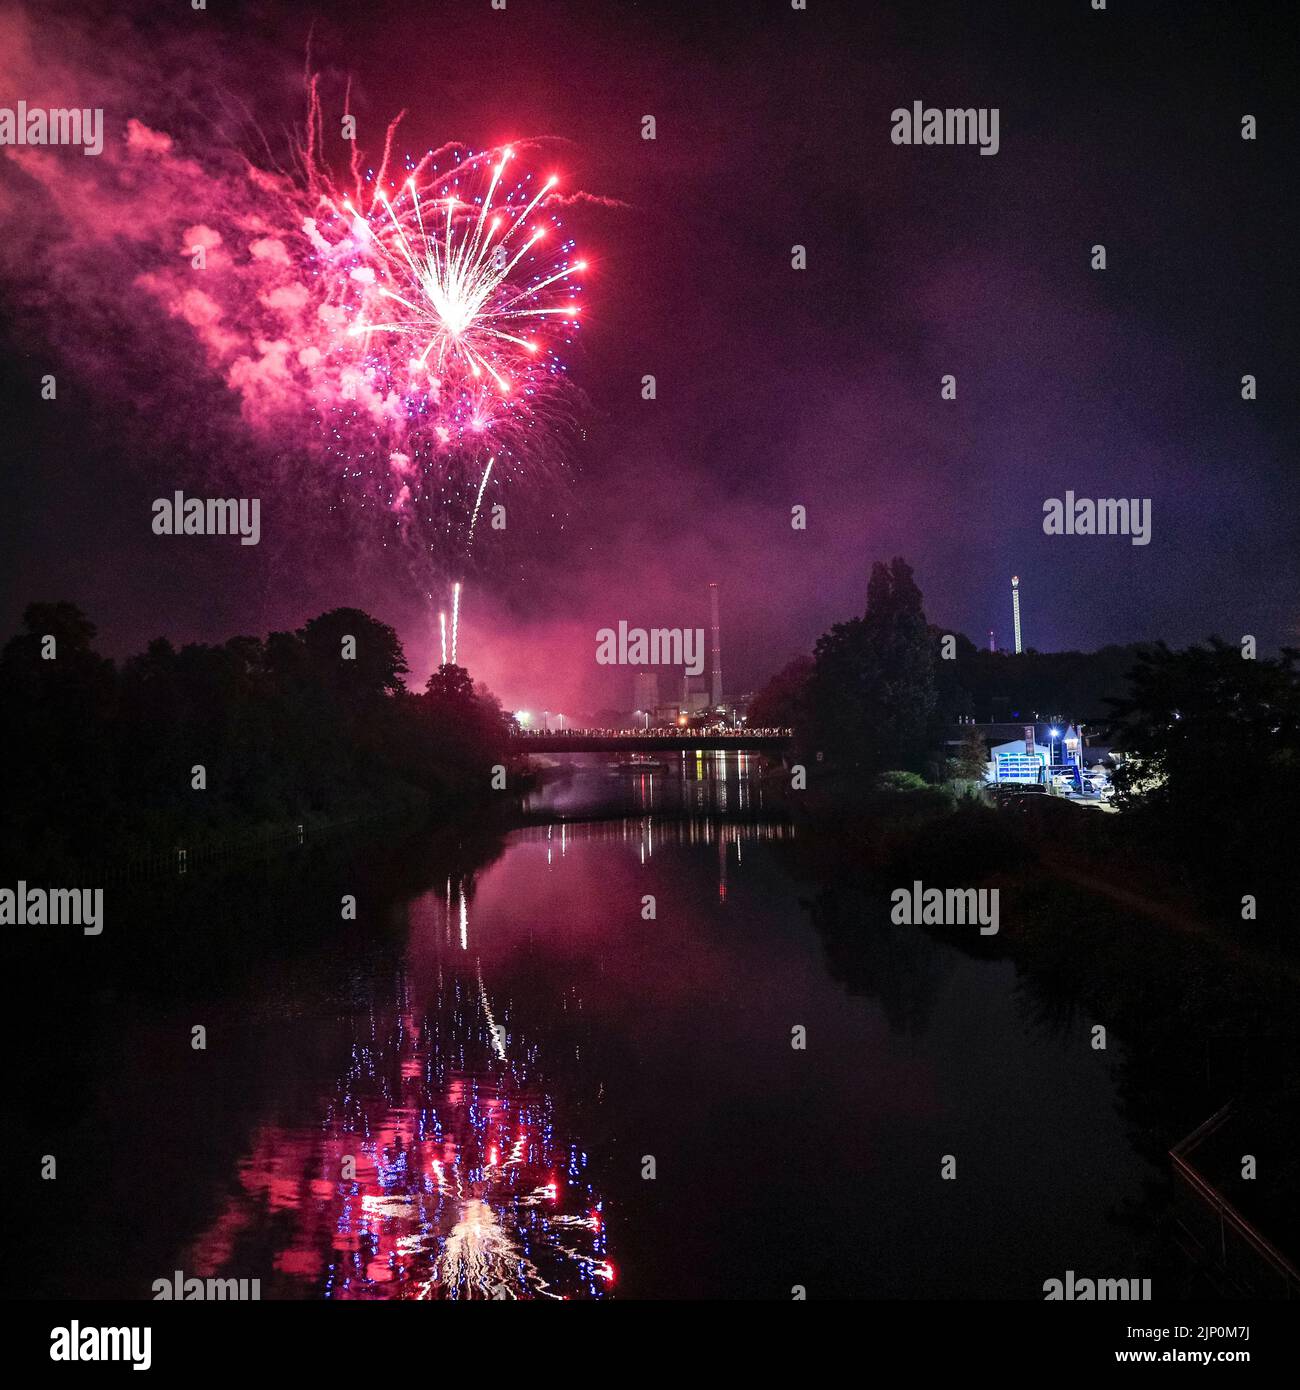 Herne, NRW, Germany. 14th Aug, 2022. Fireworks over the canal conclude the final day of the fair. Cranger Kirmes, Germany's 3rd largest funfair with a tradition dating back to the middle ages, has returned to pre-pandemic visitor numbers with more than 3.9m attending in hot, sunny weather, enjoying the rides, rollercoasters, beer halls, food and drink. The funfair concluded tonight with fireworks over the nearby Rhine-Herne Canal. Credit: Imageplotter/Alamy Live News Stock Photo